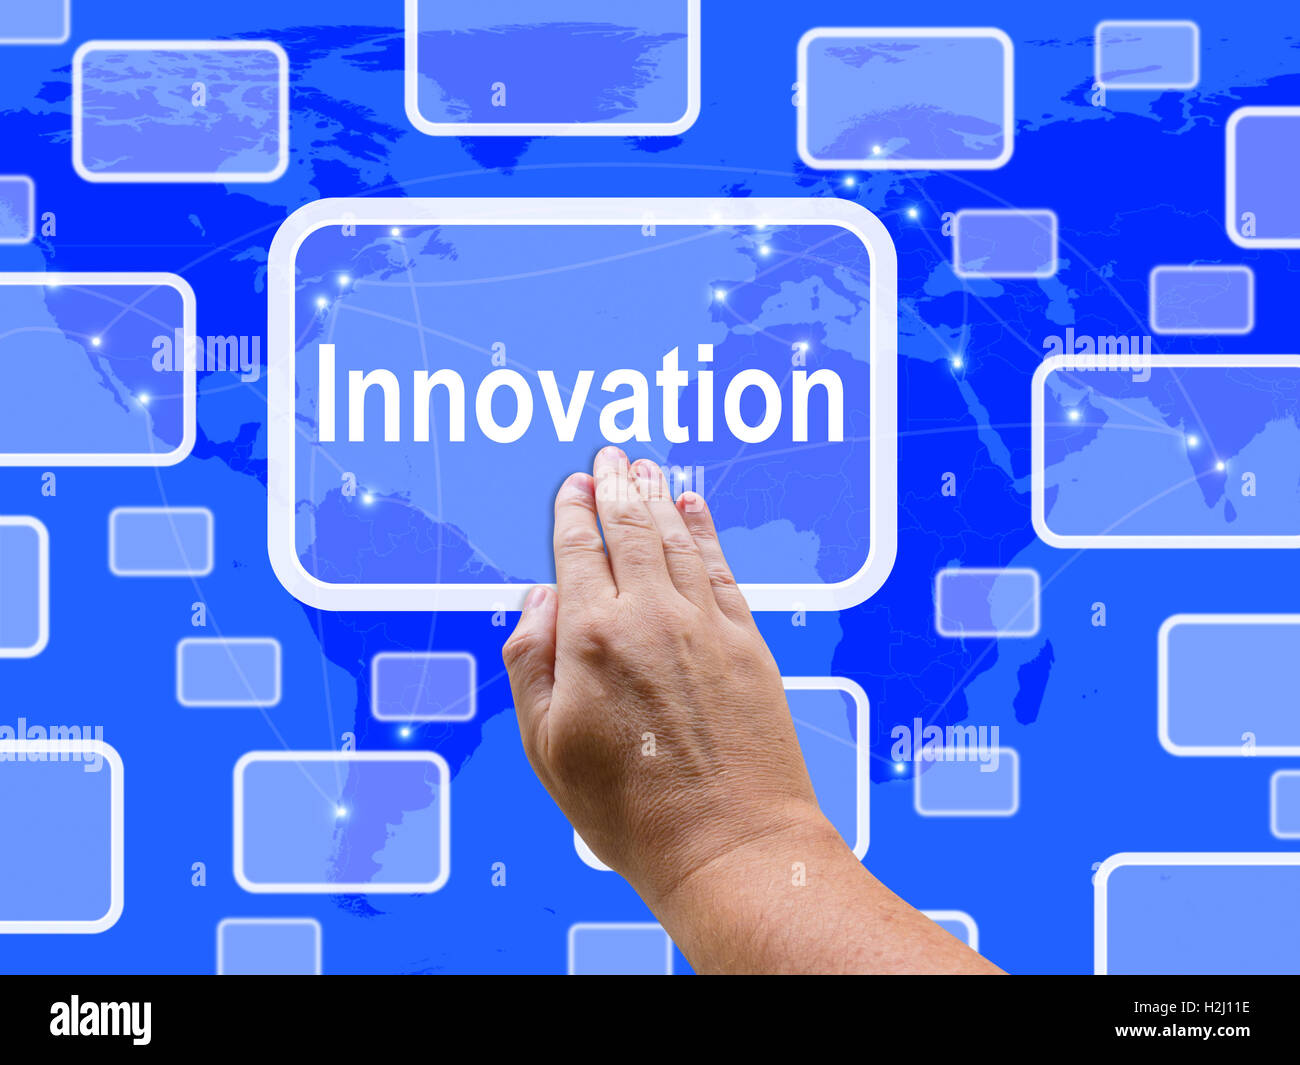 Innovation Touch Screen Means Ideas Concepts Creativity Stock Photo